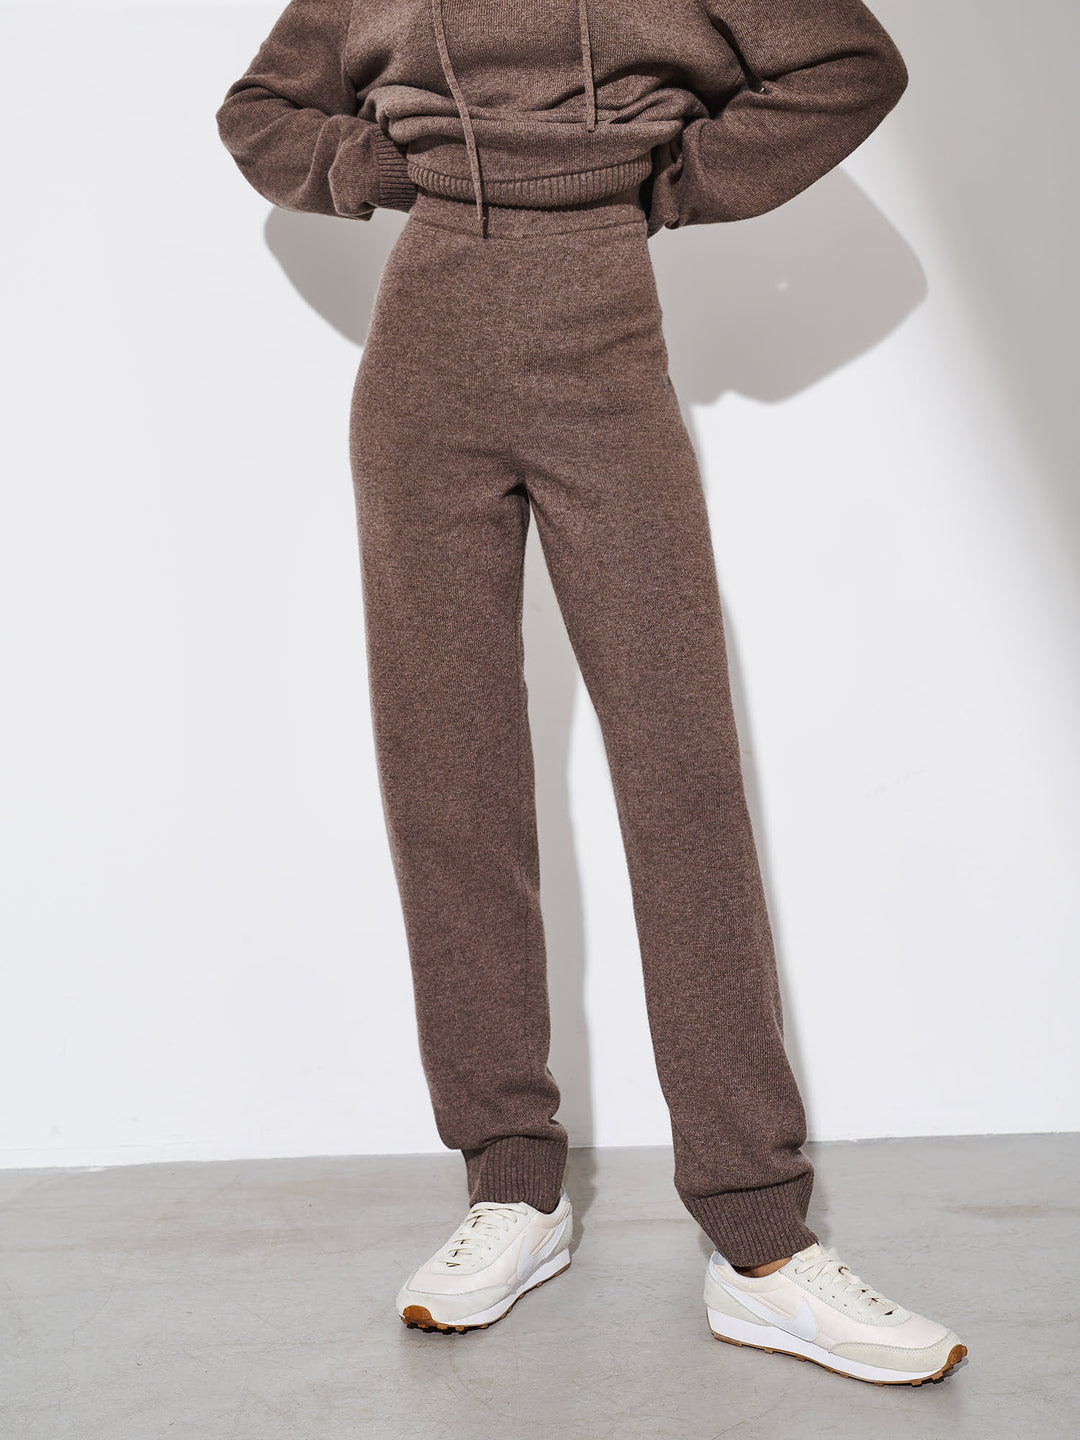 California cashmere blend pants (coffee)